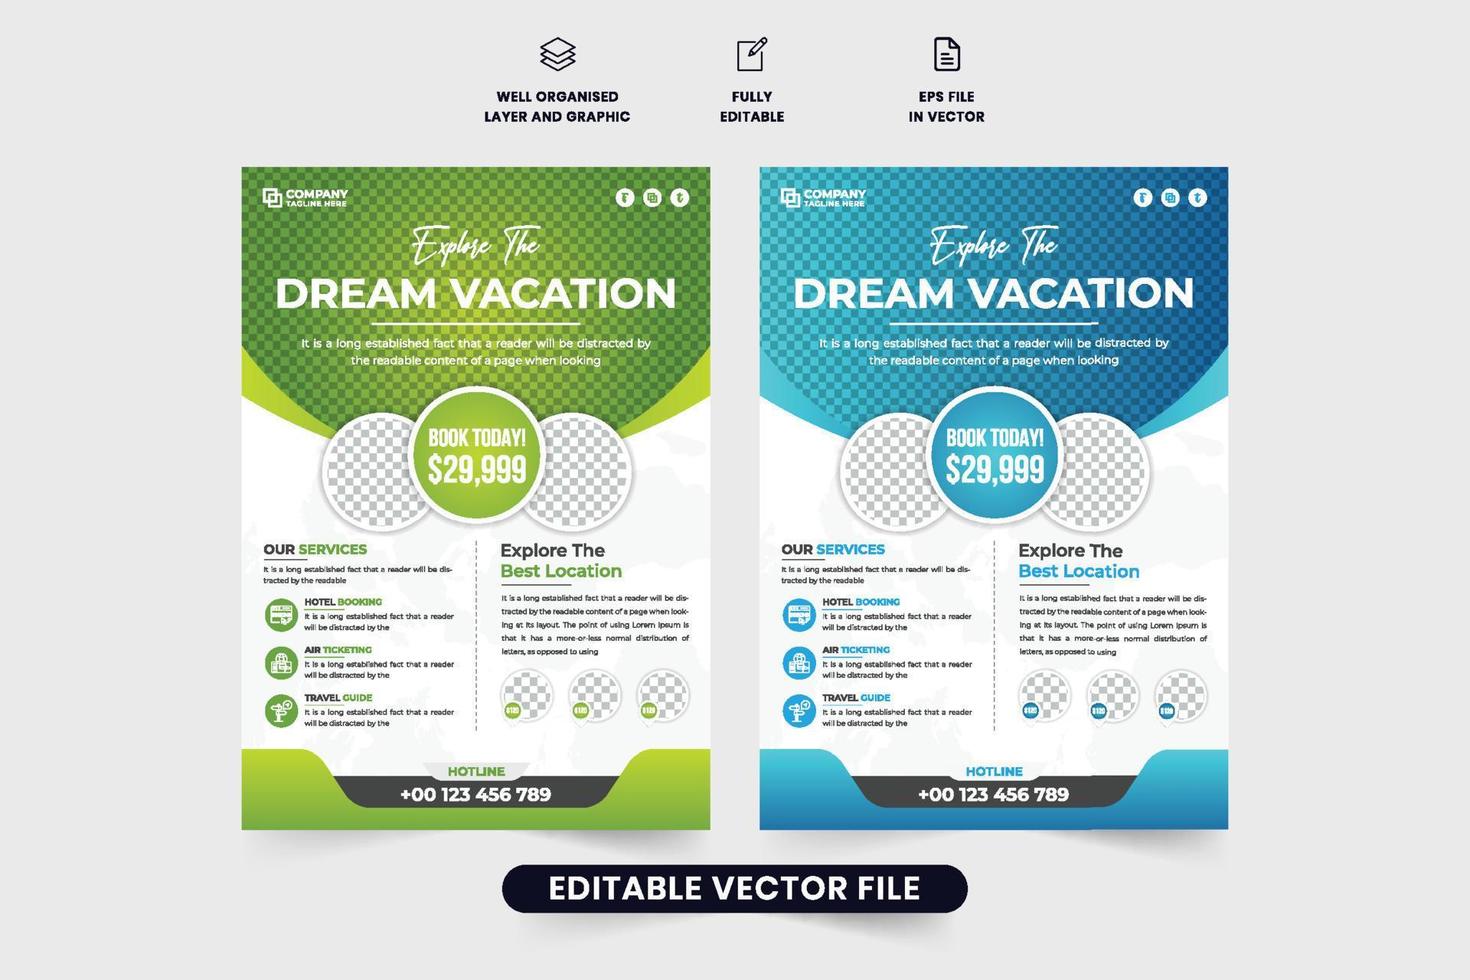 Tour group advertisement template design with green and blue colors. Modern travel agency promotional flyer vector for marketing. Vacation planner business leaflet design with photo placeholders.